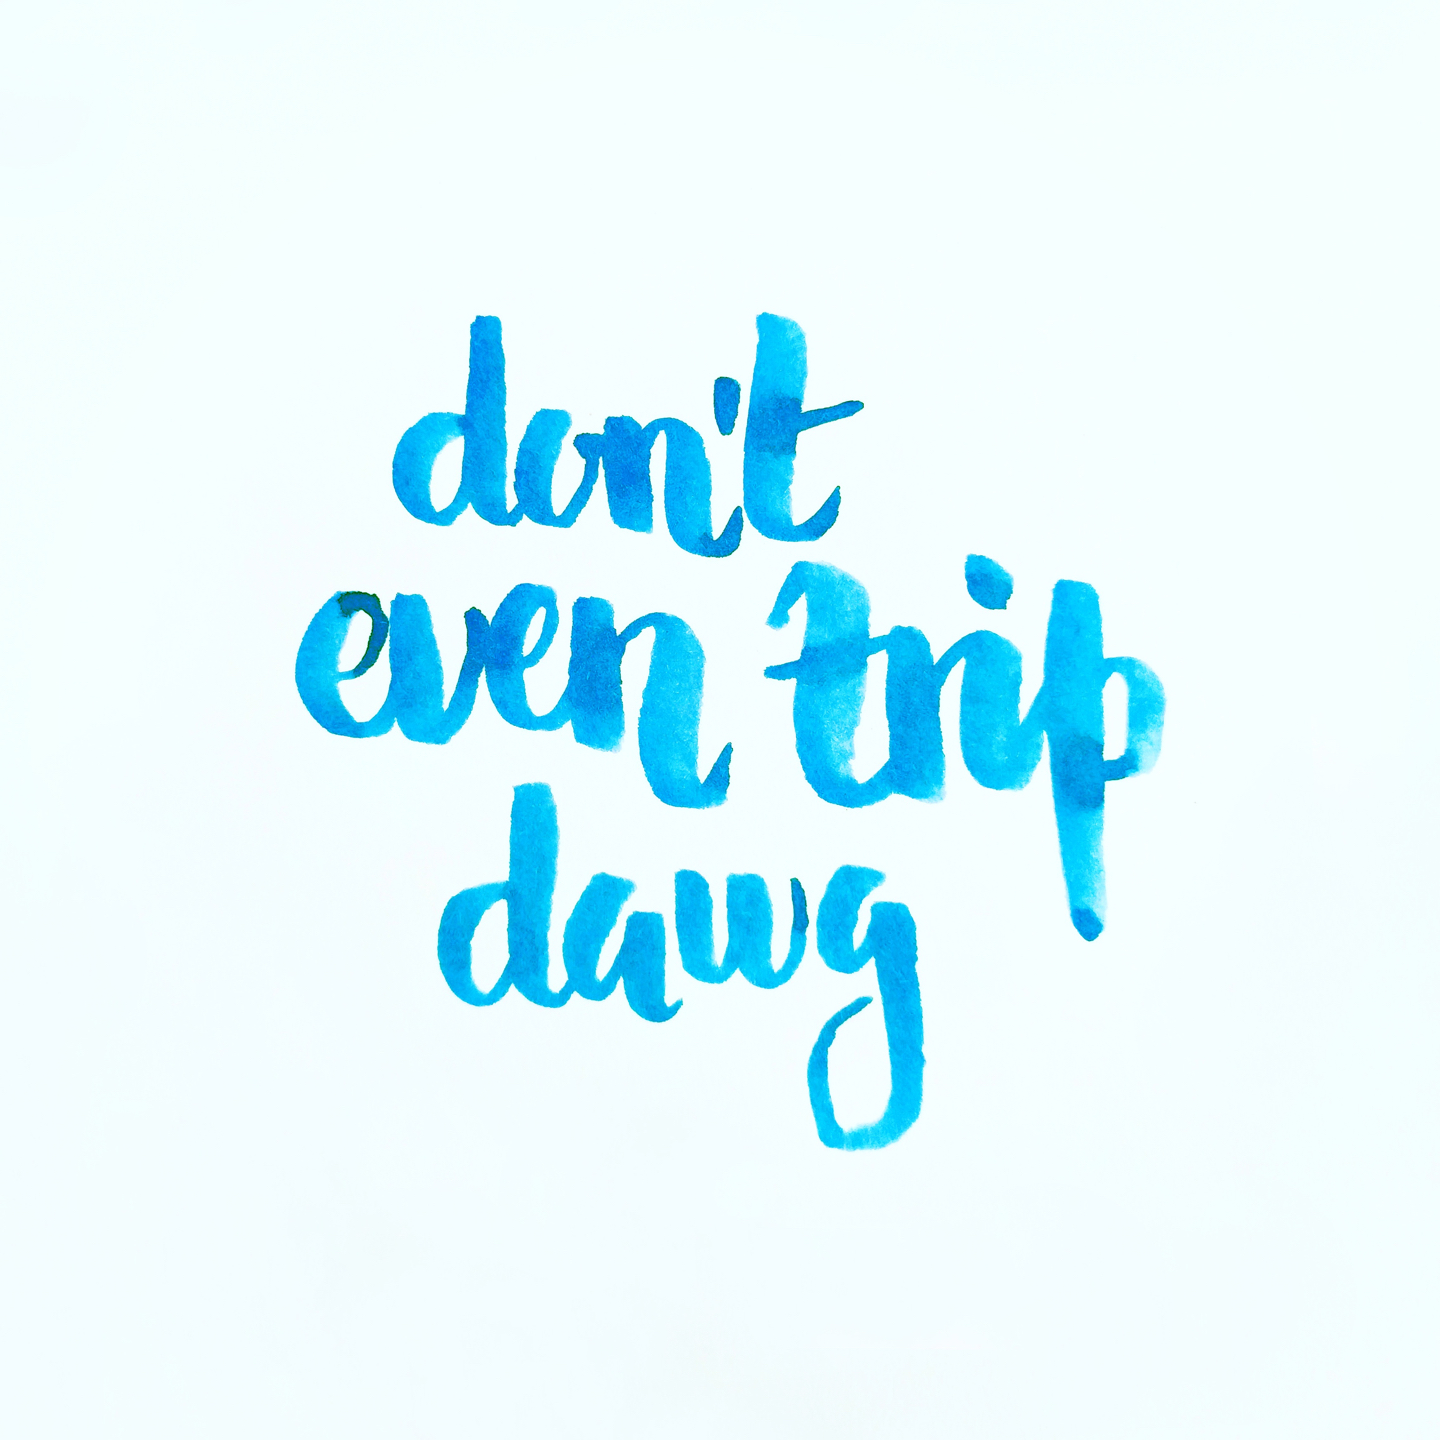 Don't even trip, dawg.